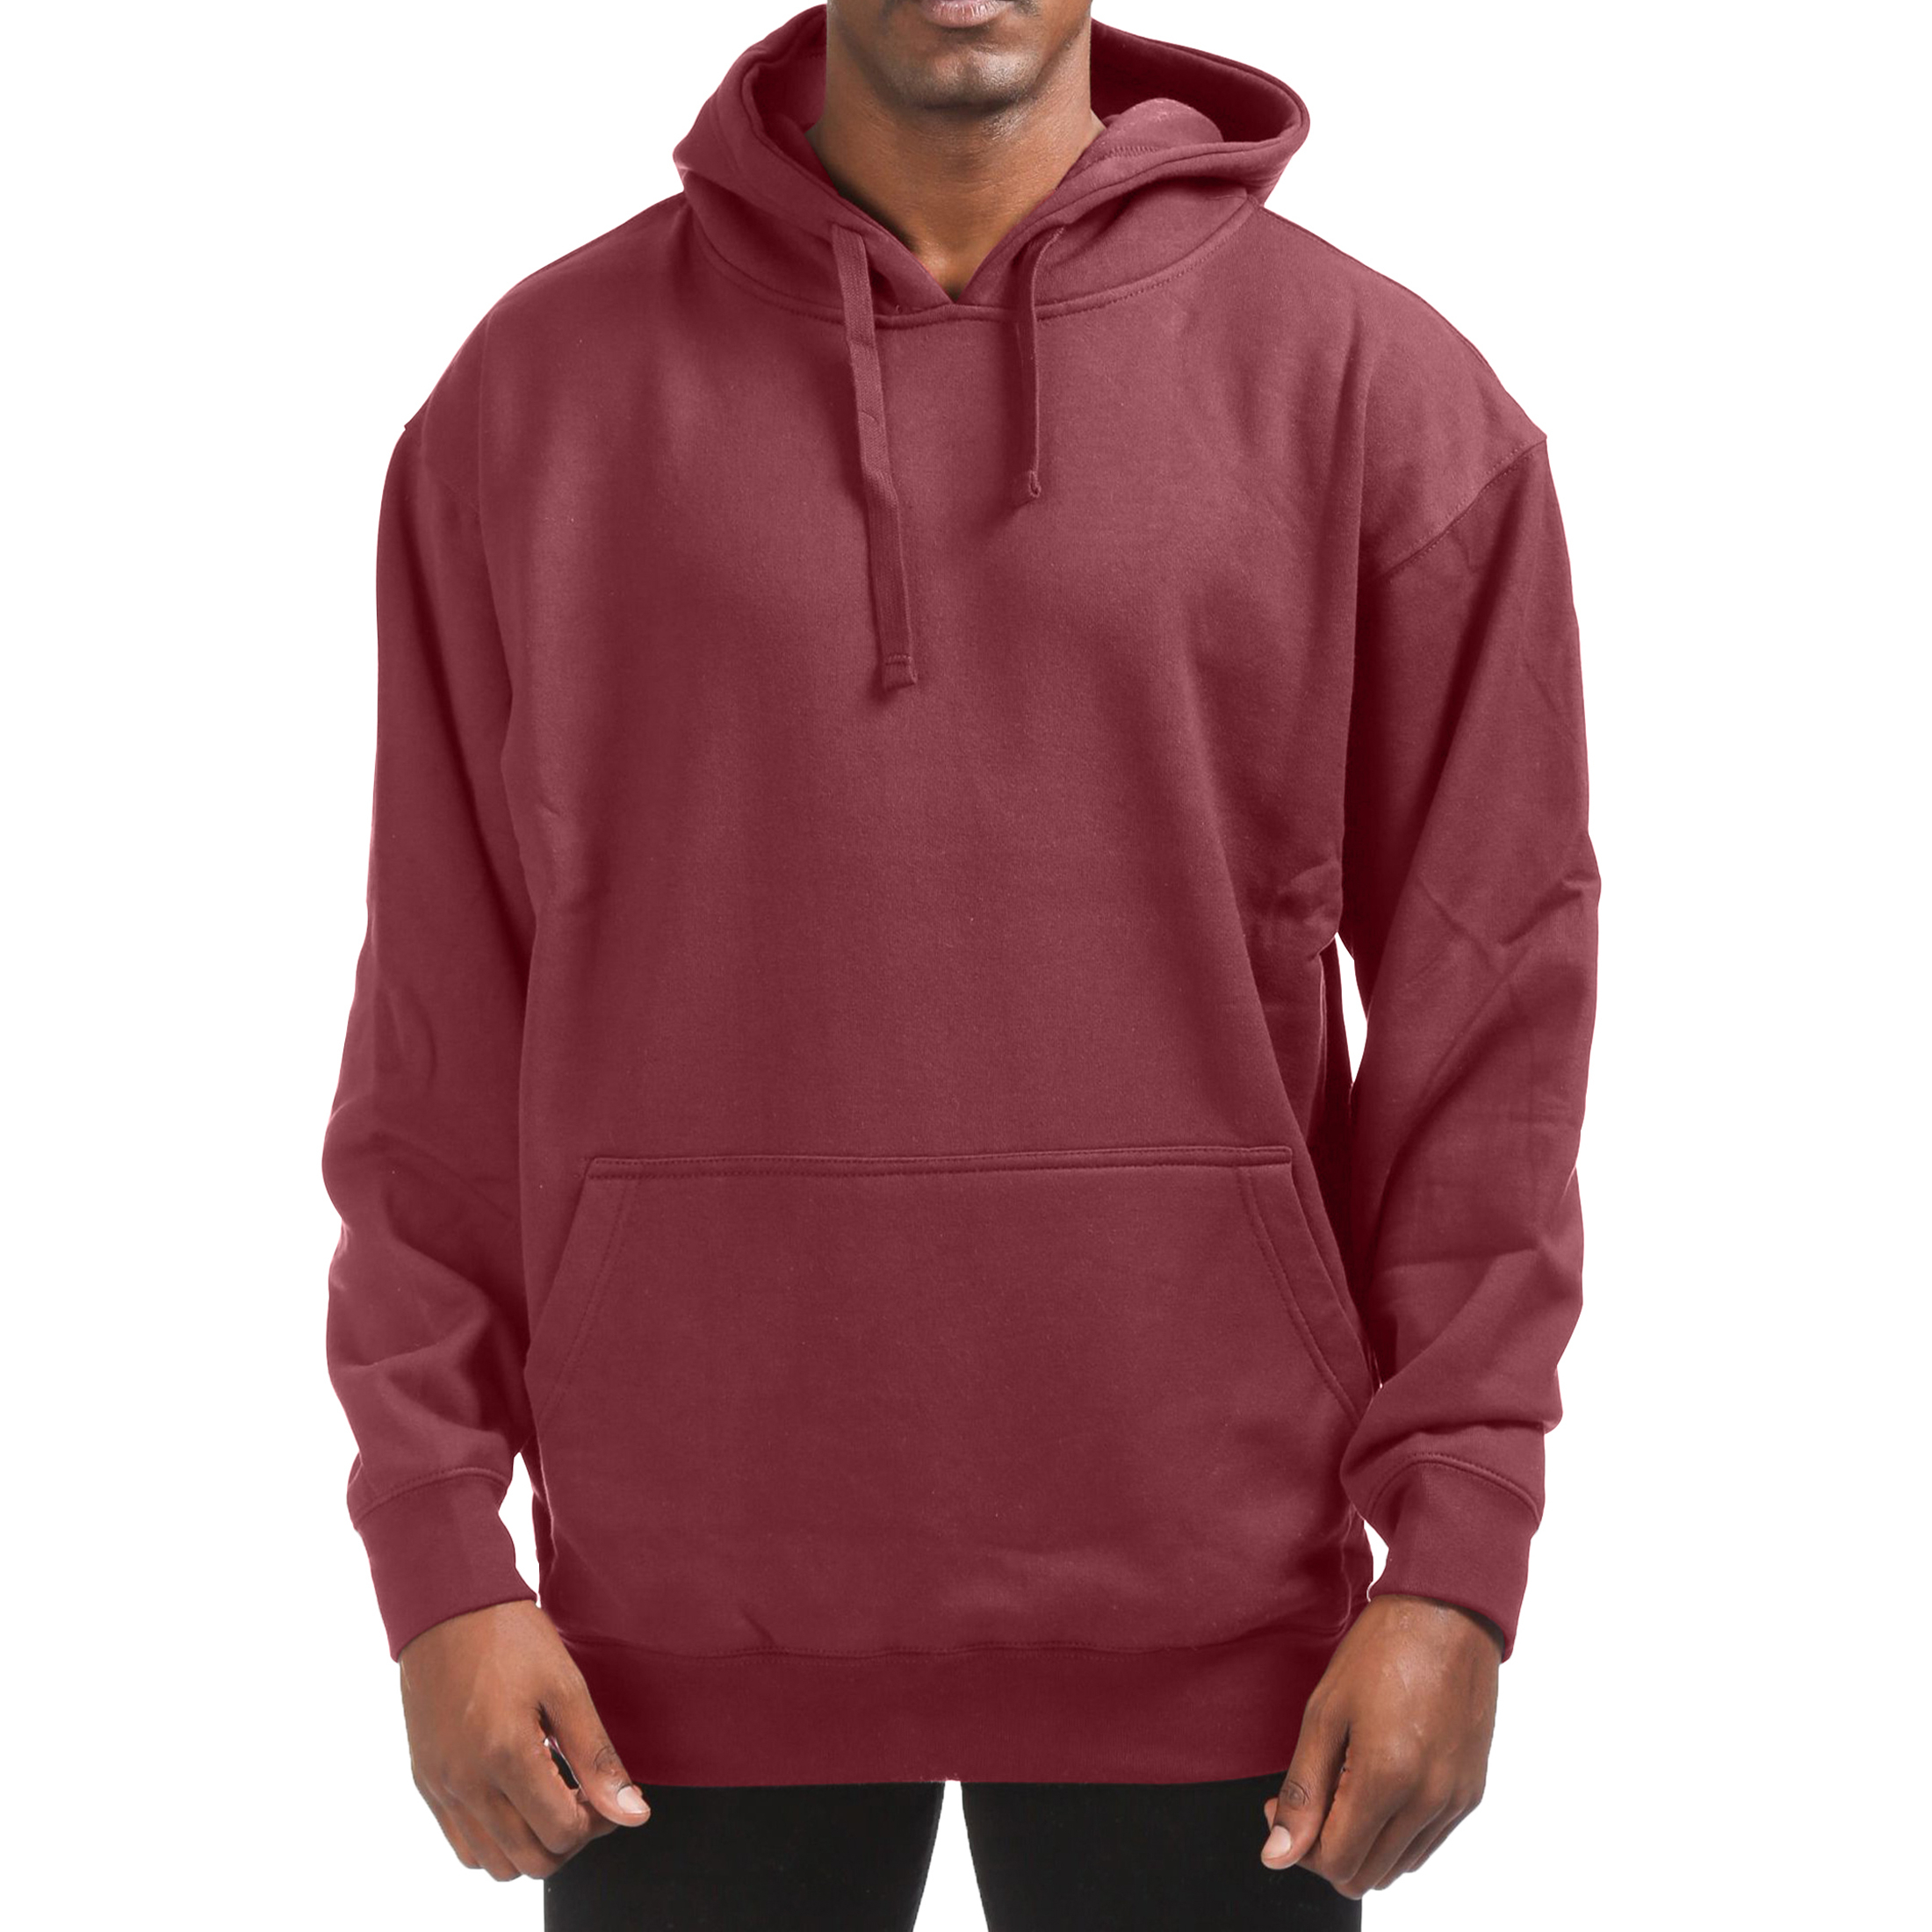 Men's Cotton-Blend Fleece Pullover Hoodie With Pocket (Big & Tall Sizes Available) - Burgundy, 3X-Large